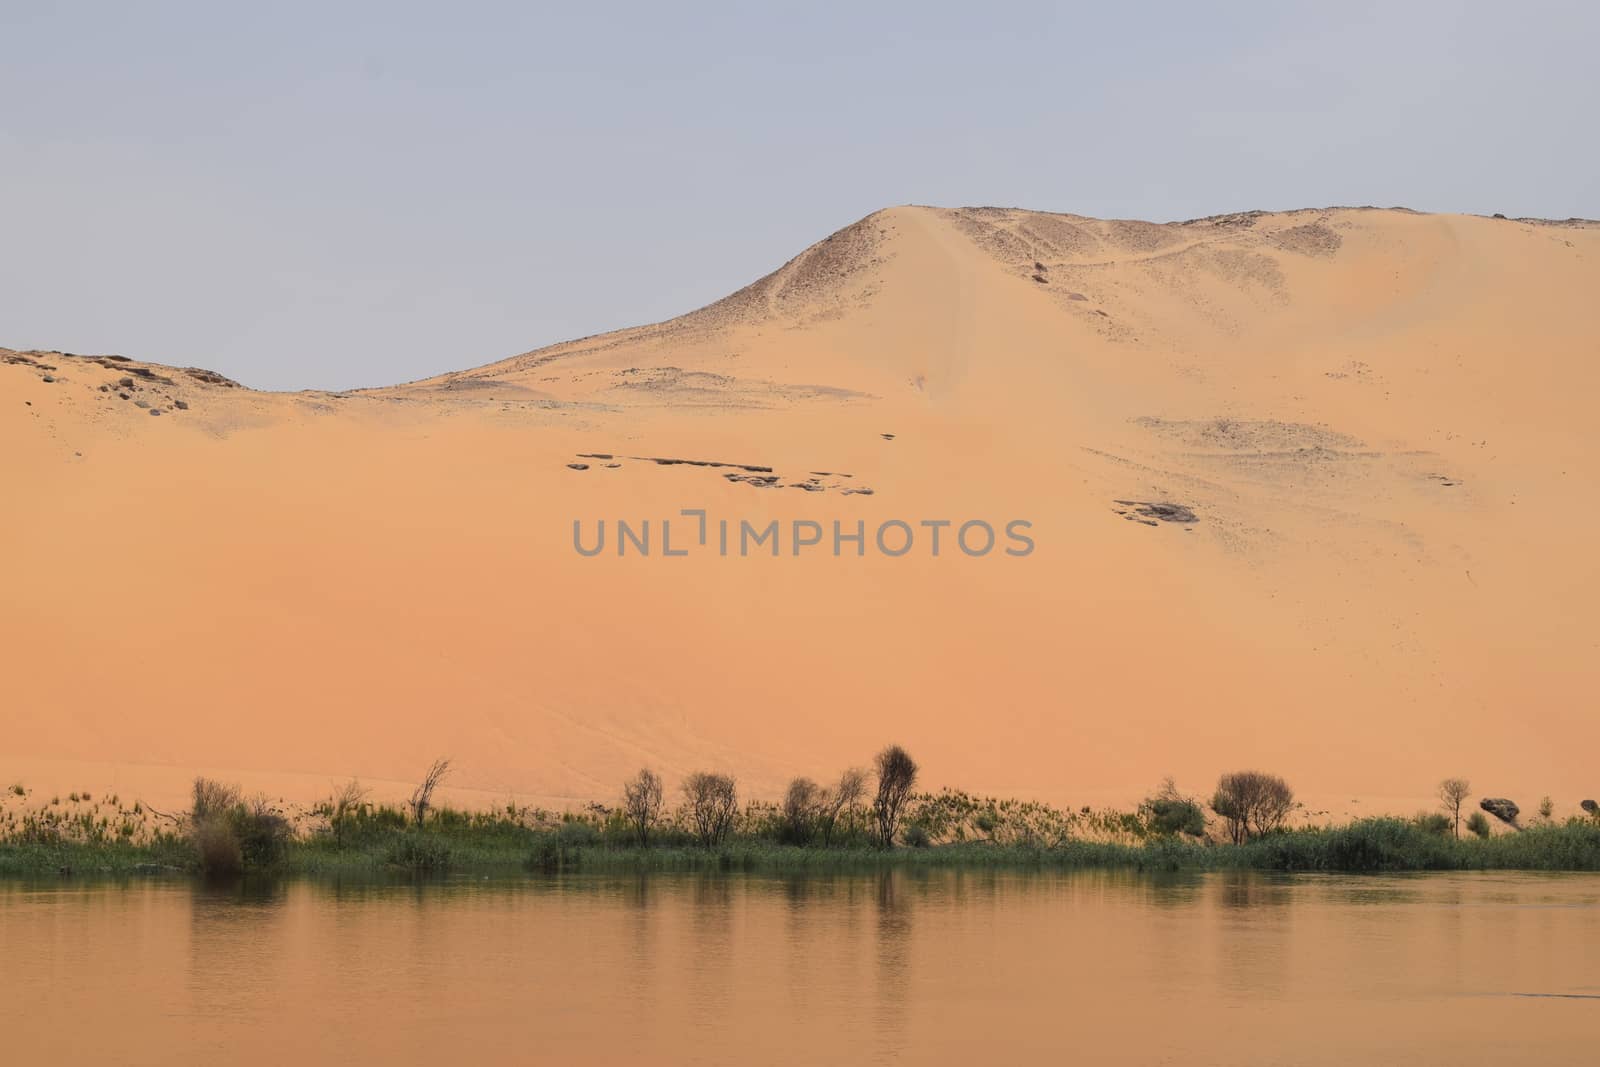 The beginning of the Sahara Desert With the Nile in the foreground taken in Aswan Egypt with Nile River Boat by TheDutchcowboy